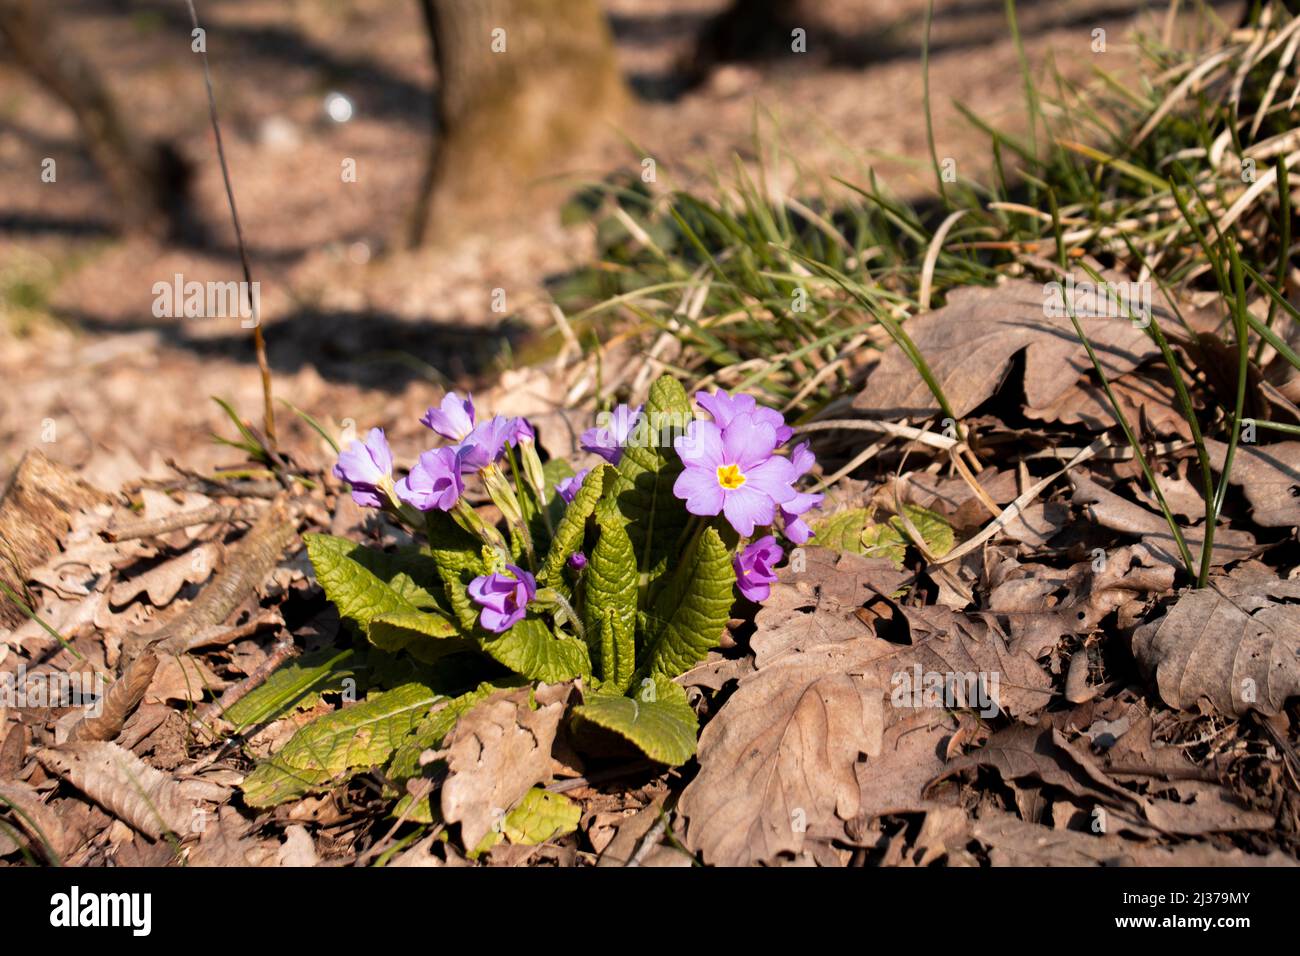 Purple dayflowers, blossom among the greenery, commelina family flower, selective focus Stock Photo